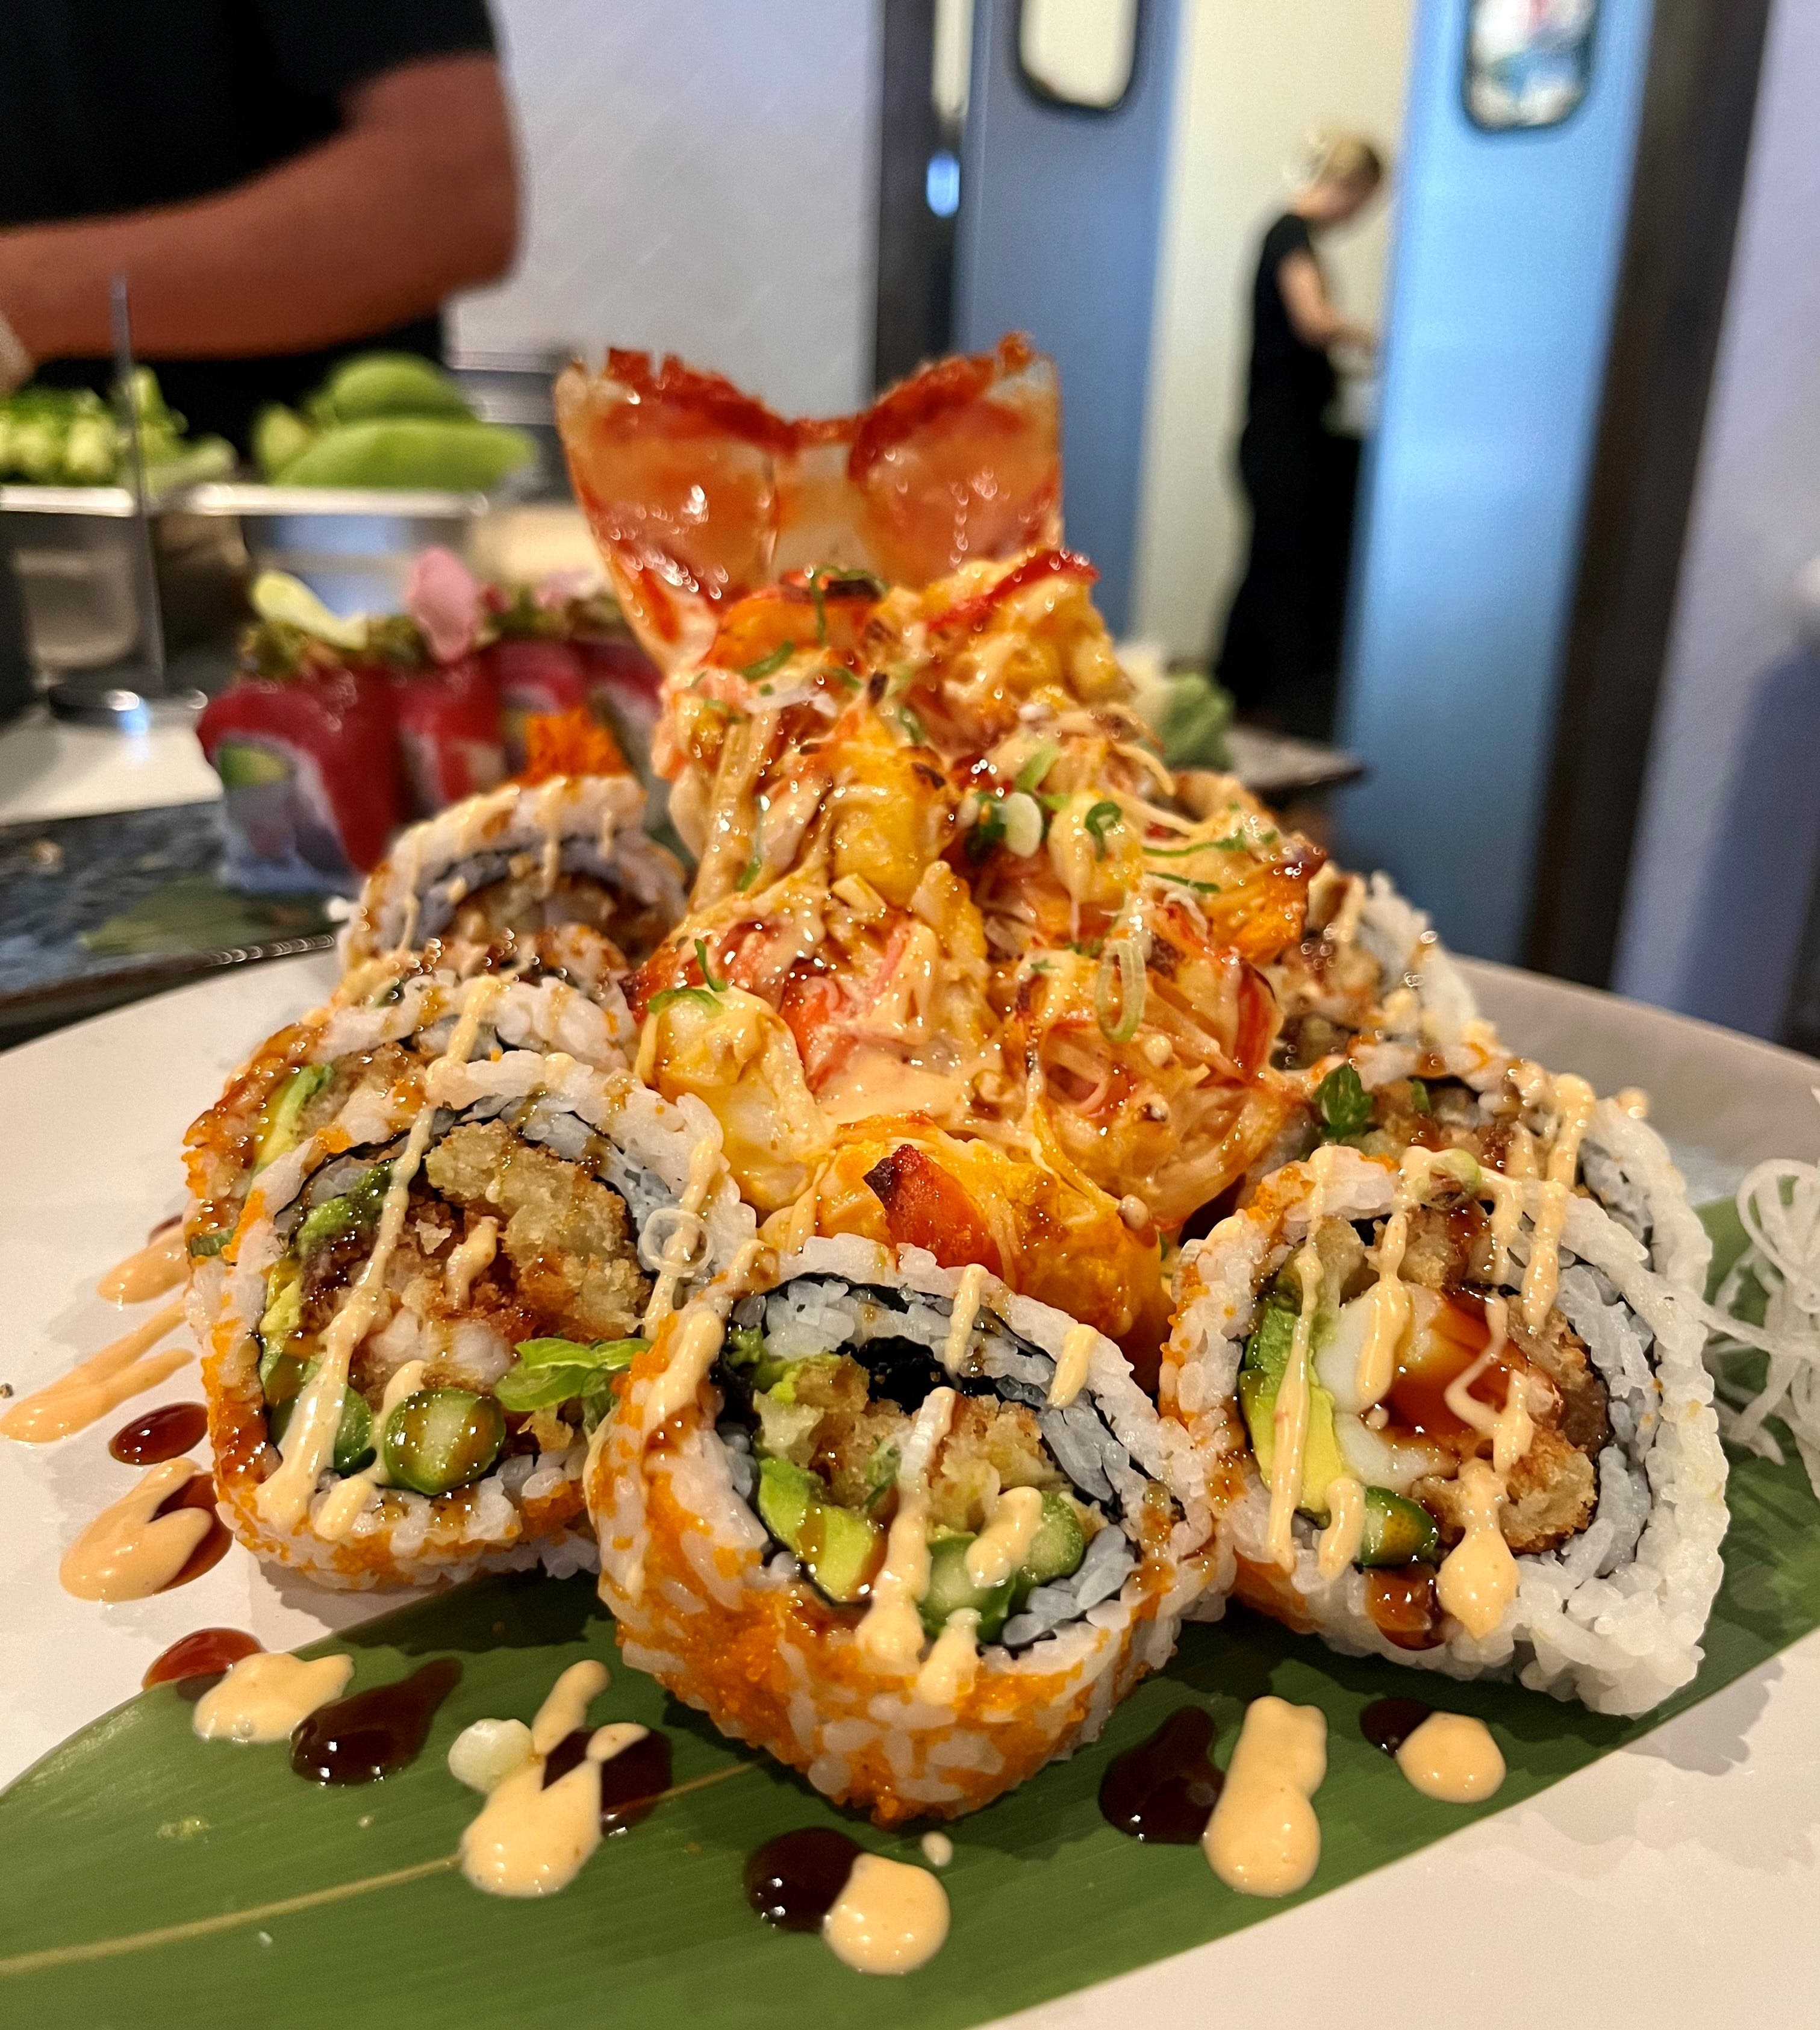 Fort Myers sushi restaurant named one of the best in country according to Yelp